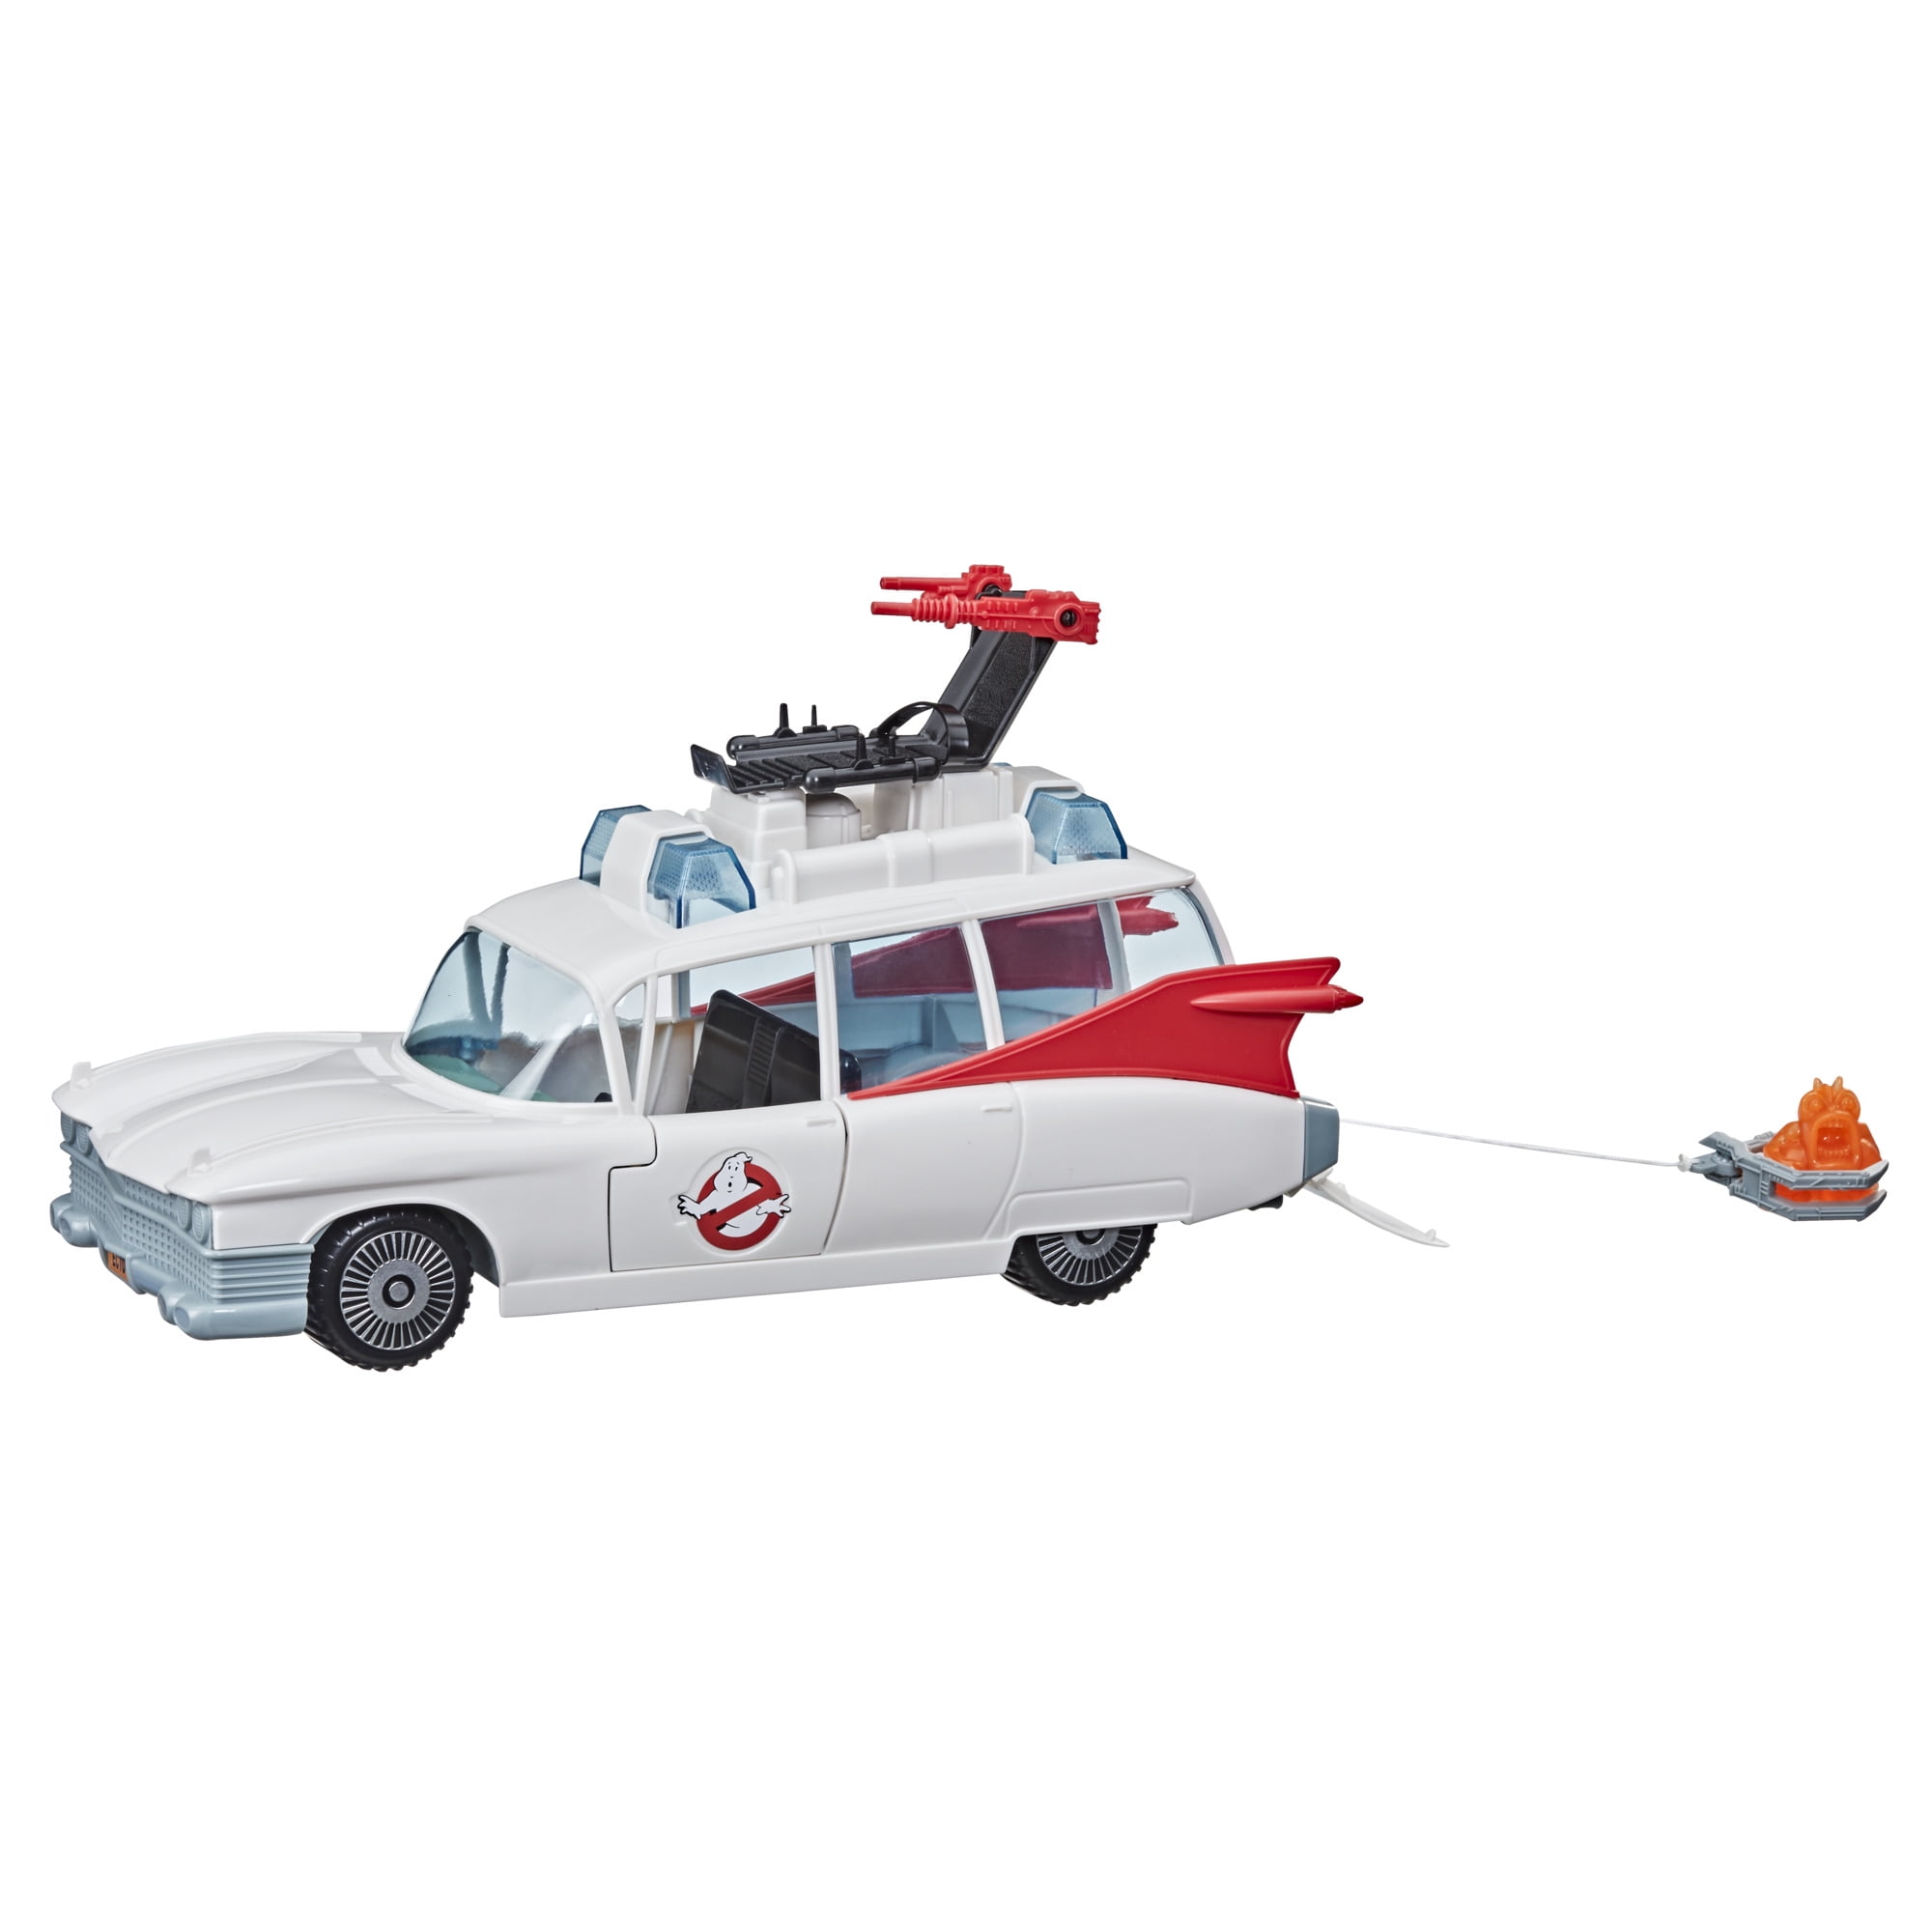 Display stand for Kenner Ghostbusters ECTO 1 ECTO 1a Ecto1 Ecto1a  SUPER COOL! 